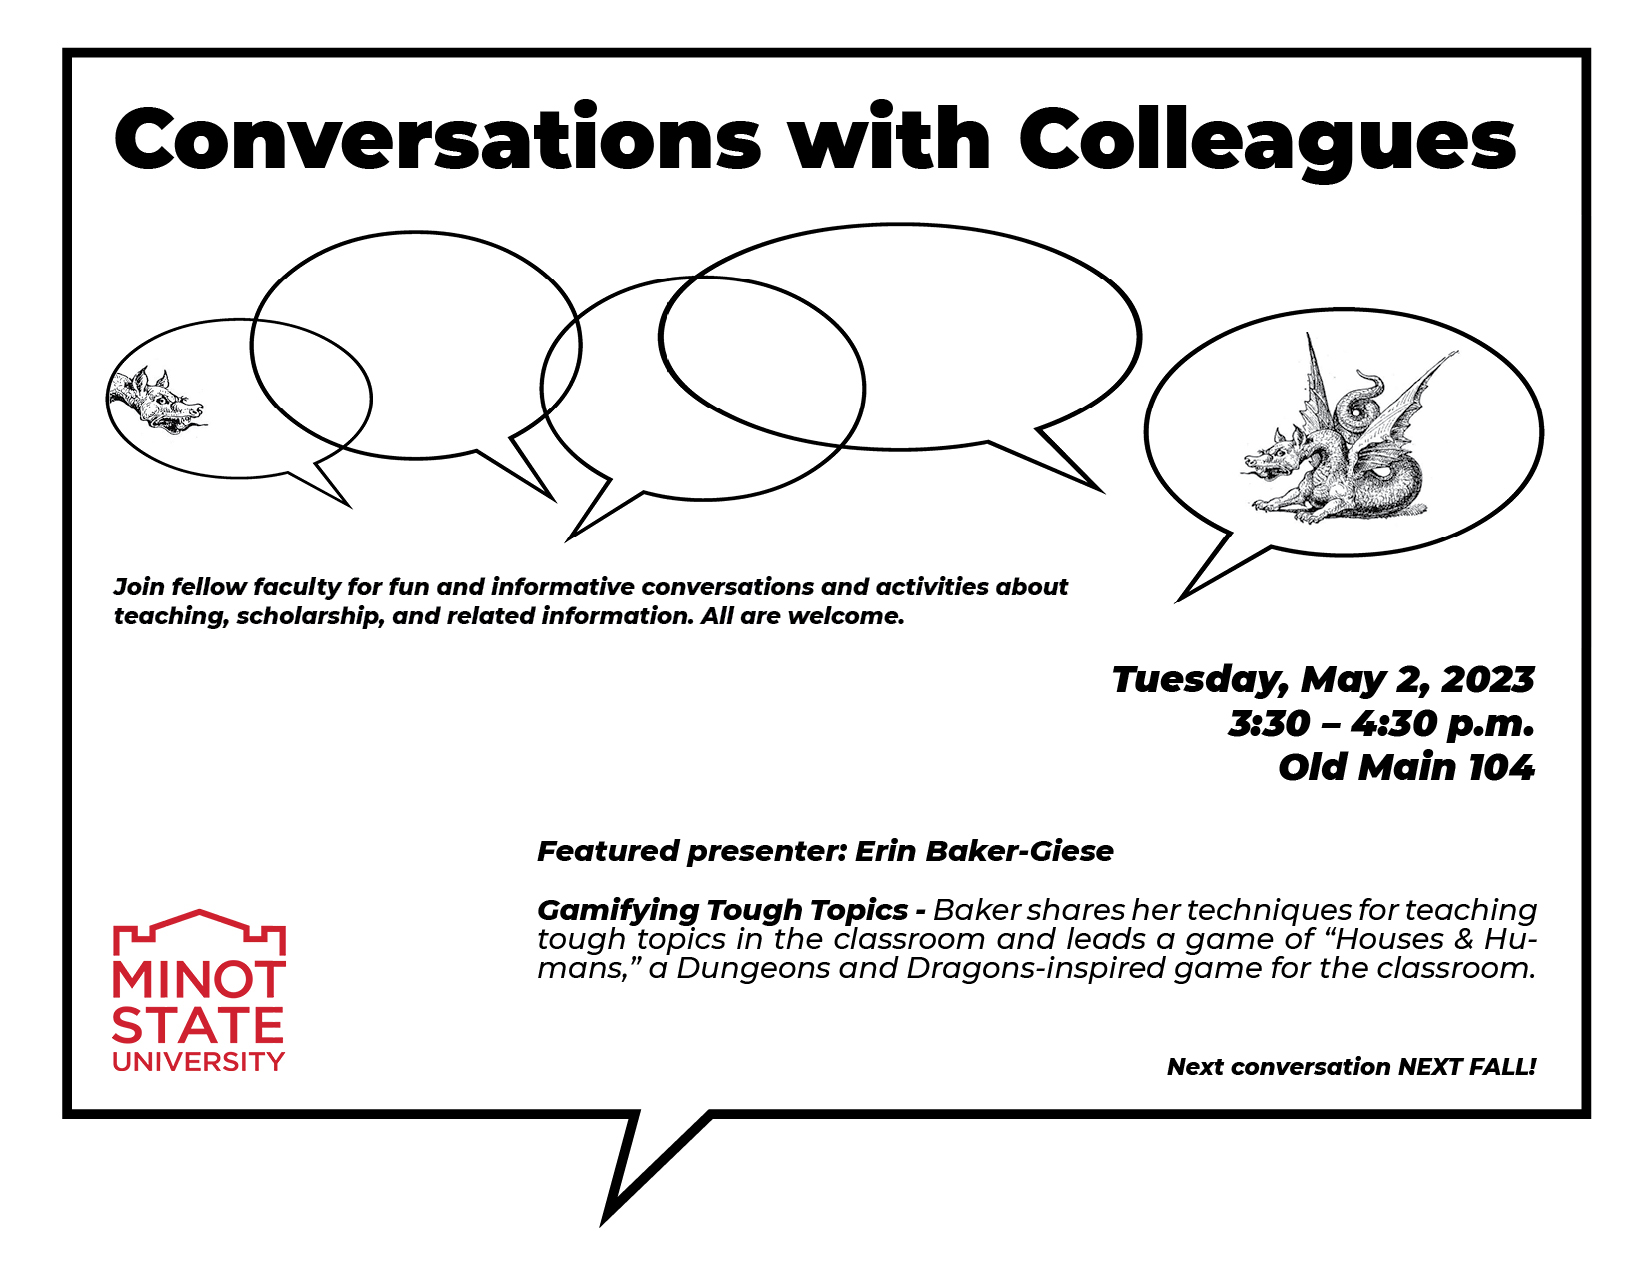 Conversations with Colleagues poster May 2, 2023